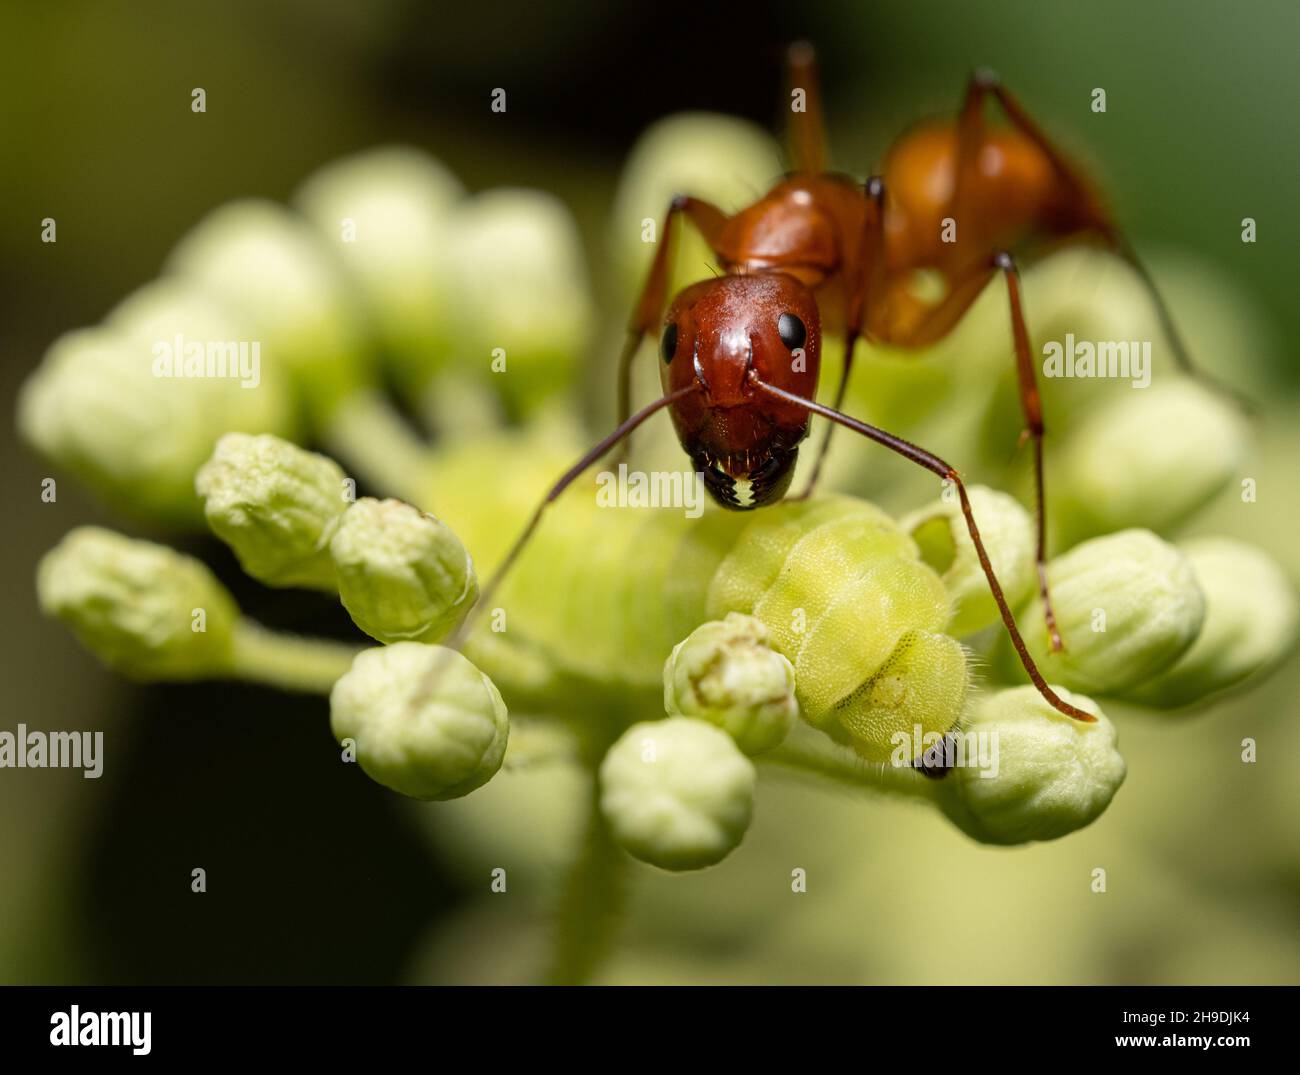 Macro shot of a red ant attacking caterpillar on flower buds Stock Photo